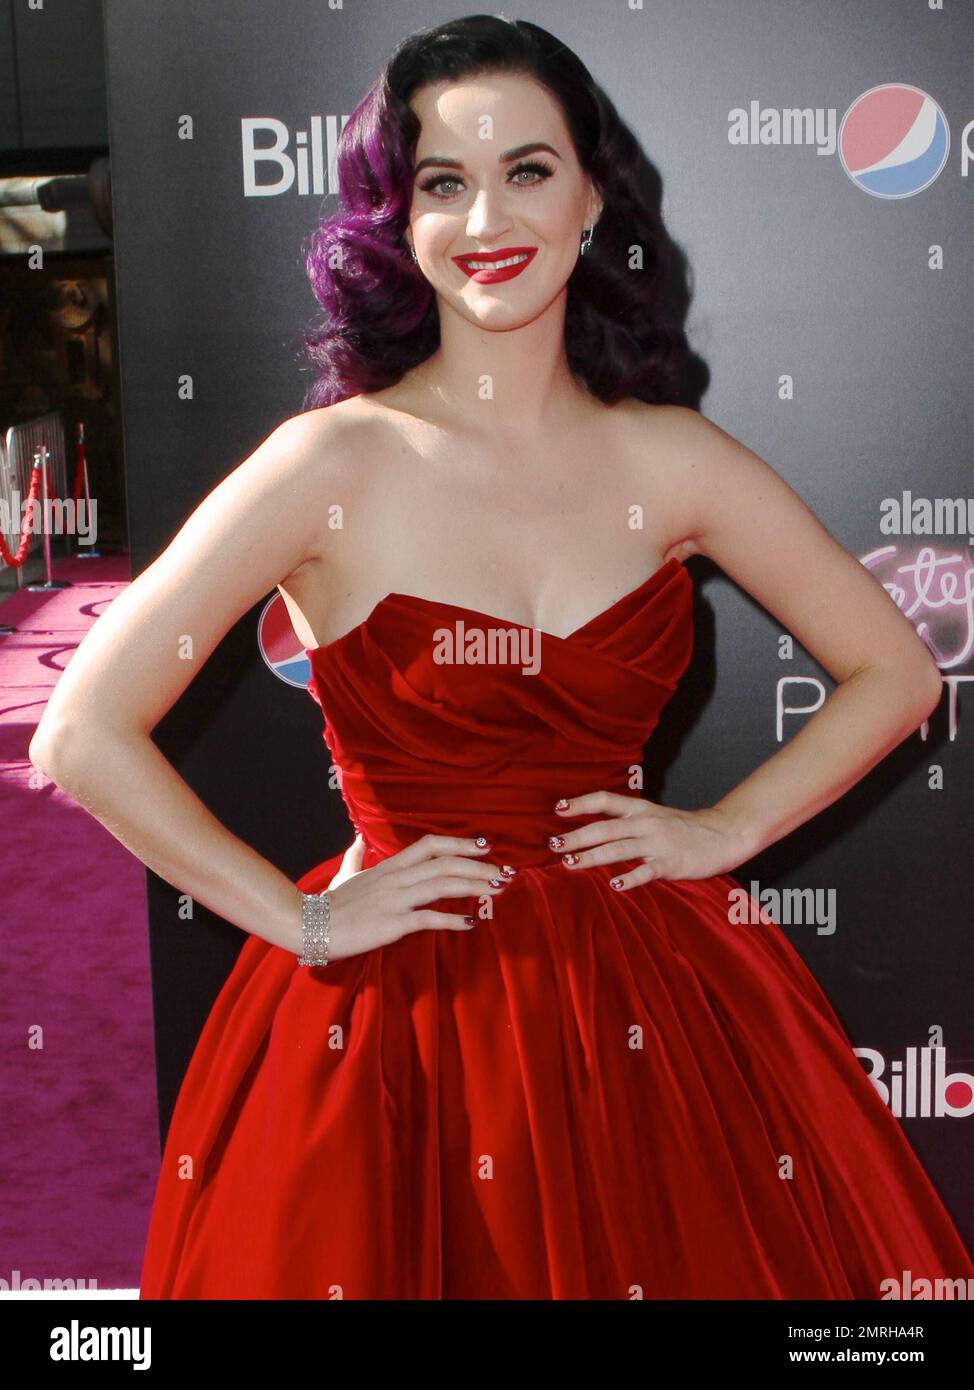 Singer Katy Perry wears a lovely red strapless dress with red high heels as  she walks the pink carpet of the L.A. Premiere of her 3D-Concert  Documentary "Katy Perry: Part Of Me"